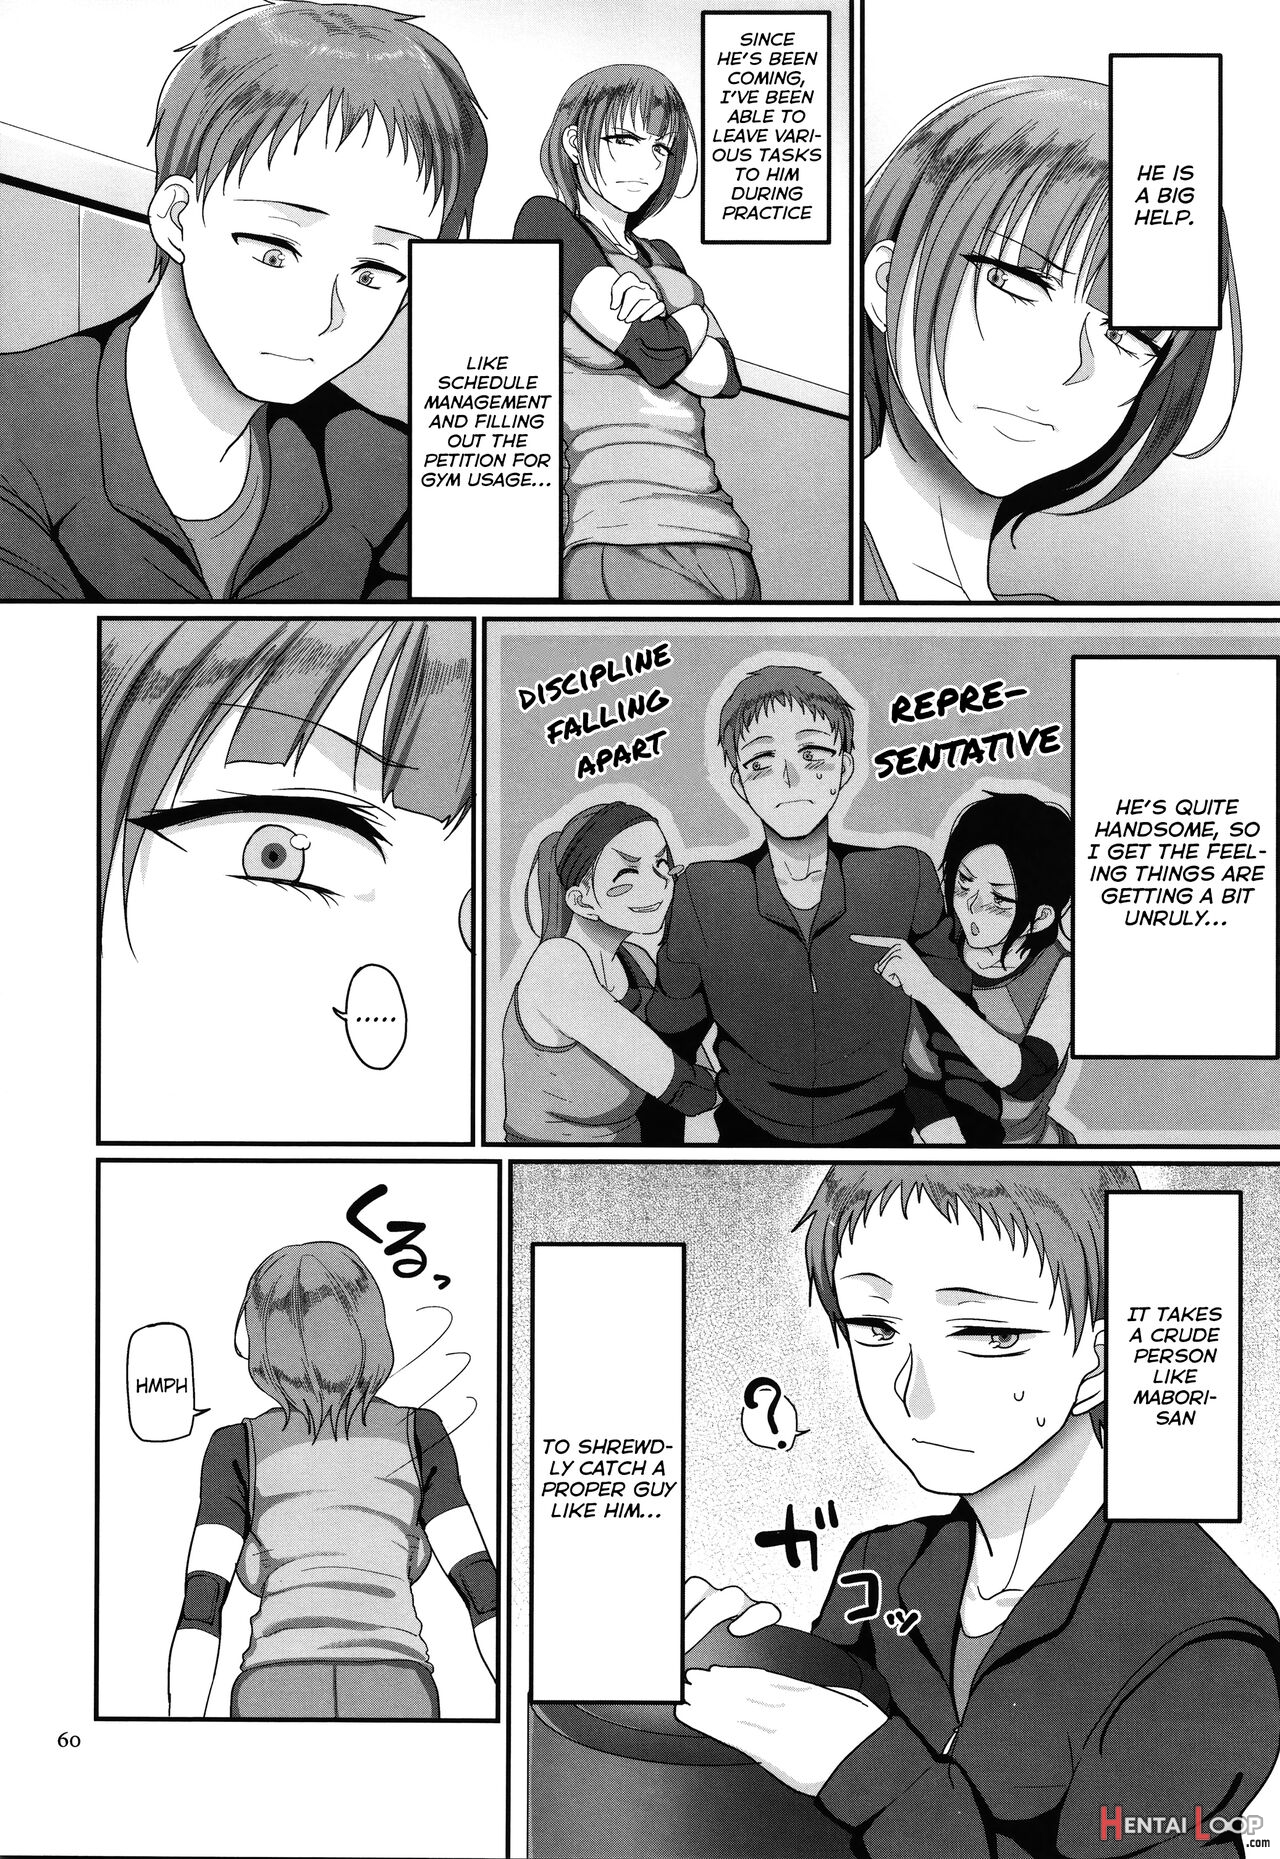 Affairs Of The Women's Volleyball Circle Of K City, S Prefecture 1 page 62